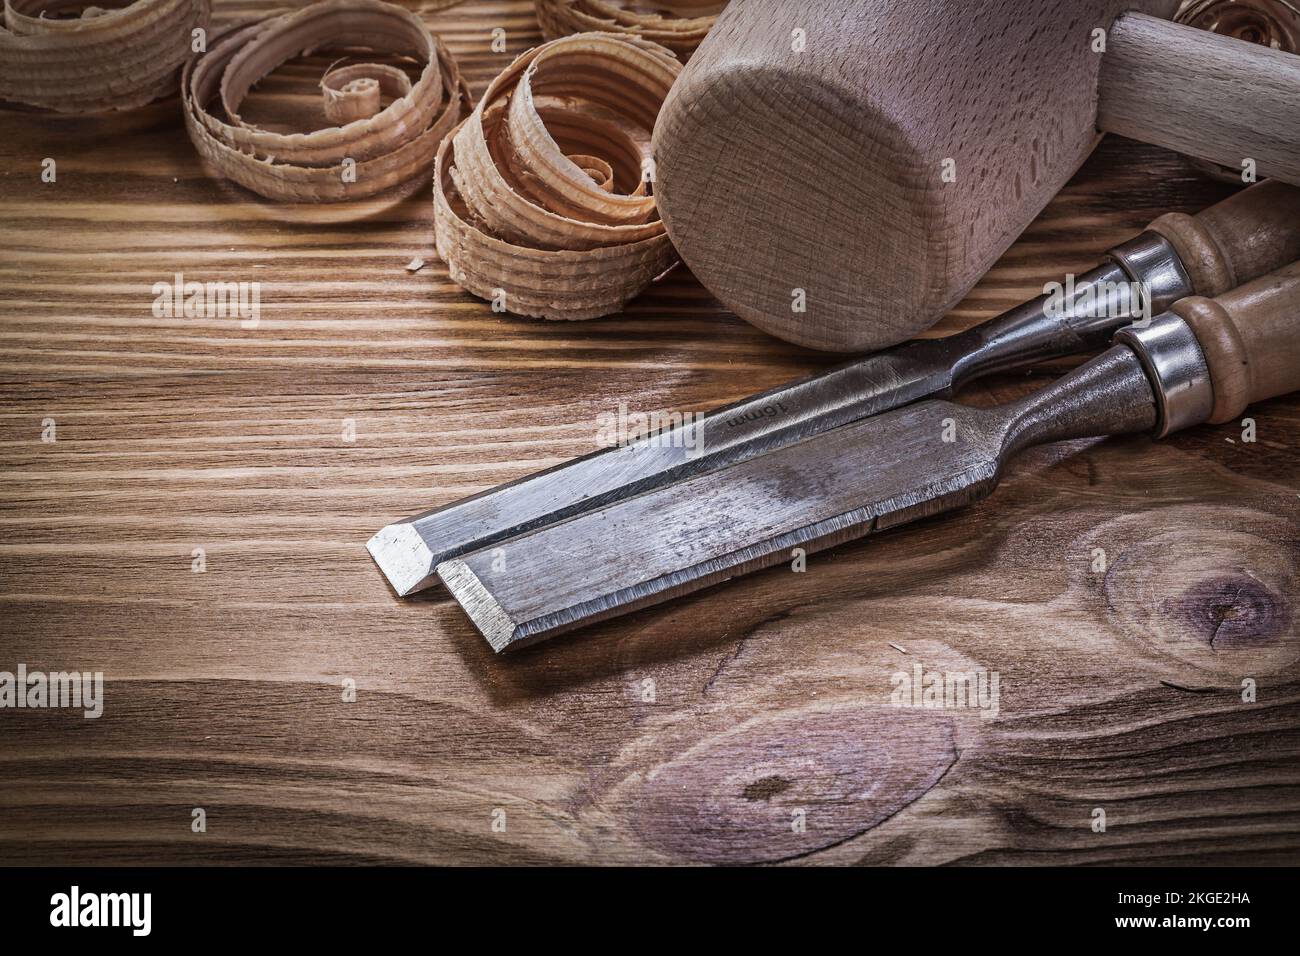 Flat chisels curled shavings wooden hammer on wood board construction concept. Stock Photo